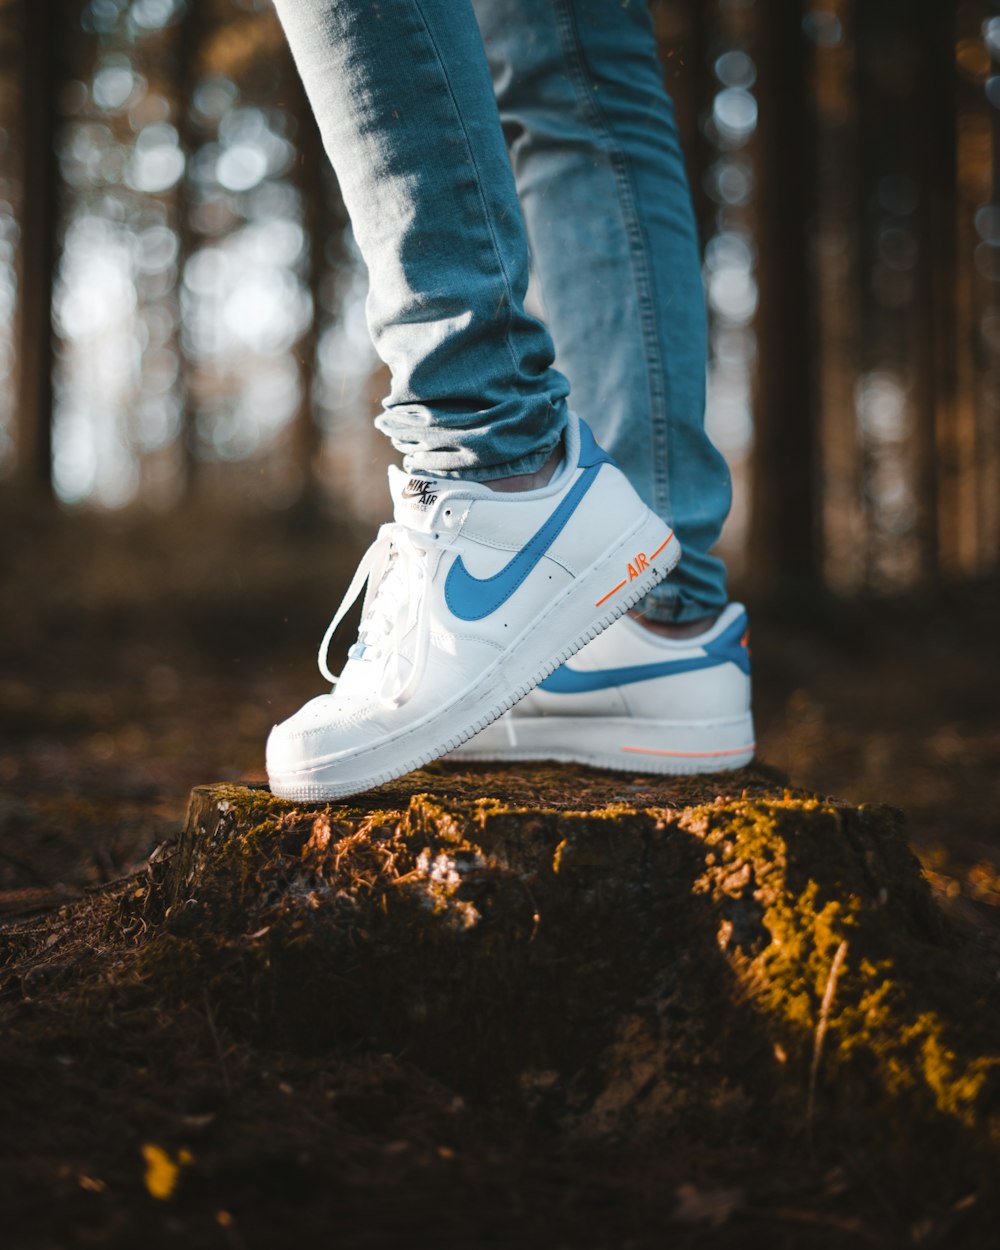 person wearing blue denim jeans and white Nike Air Max shoes standing on  tree stomp photo – Free Apparel Image on Unsplash